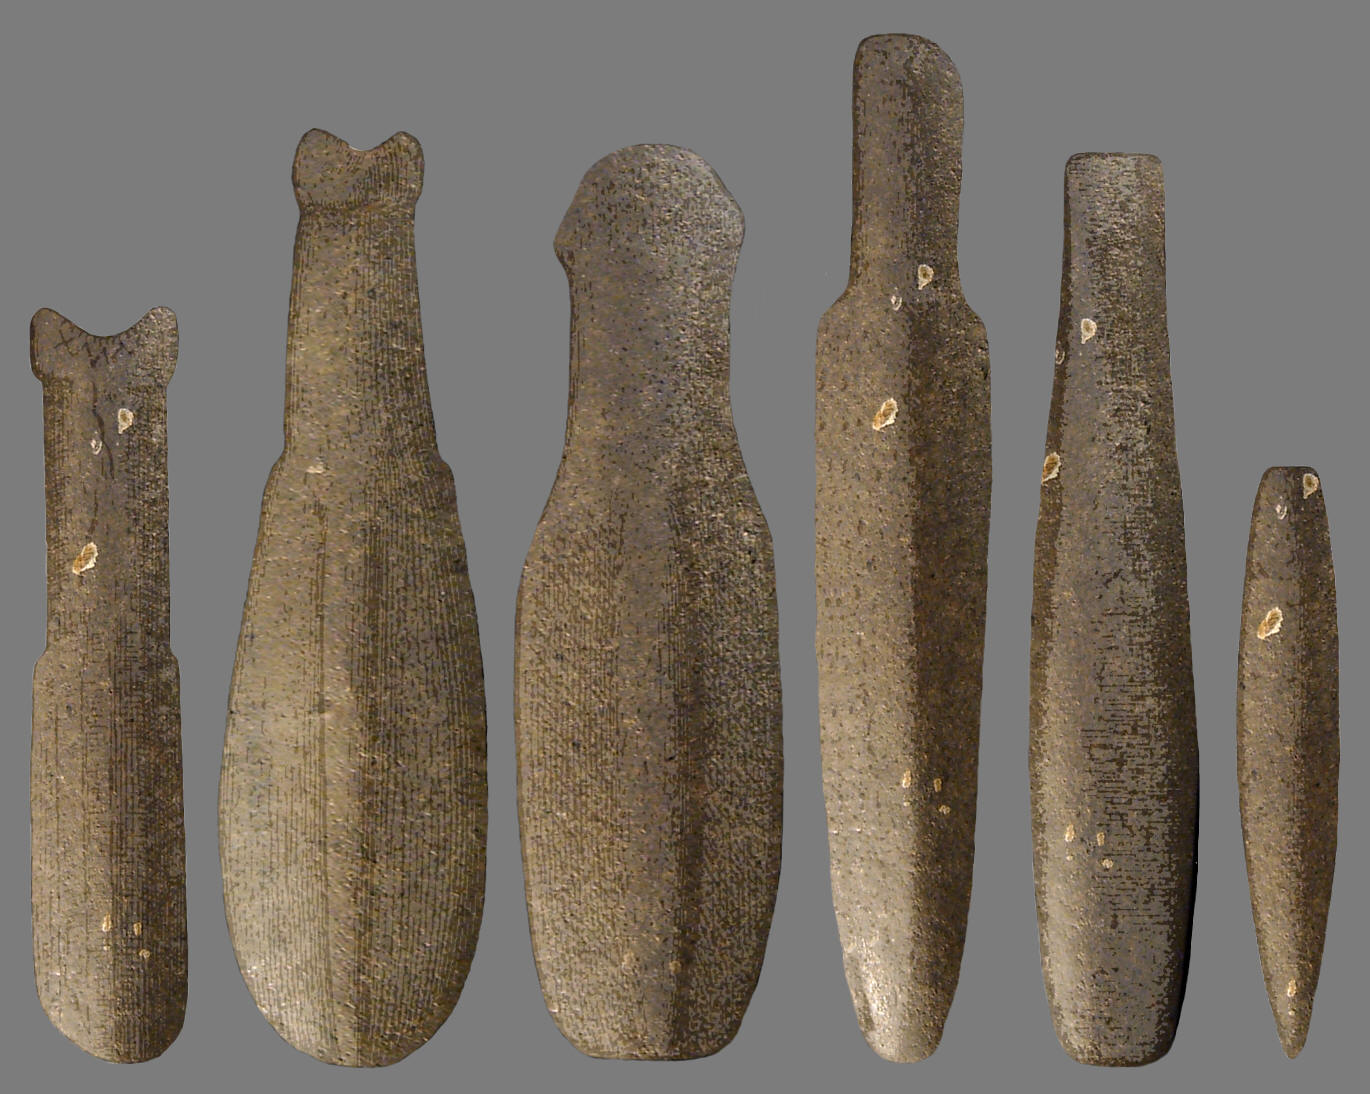 Six stone clubs from south central Washington.